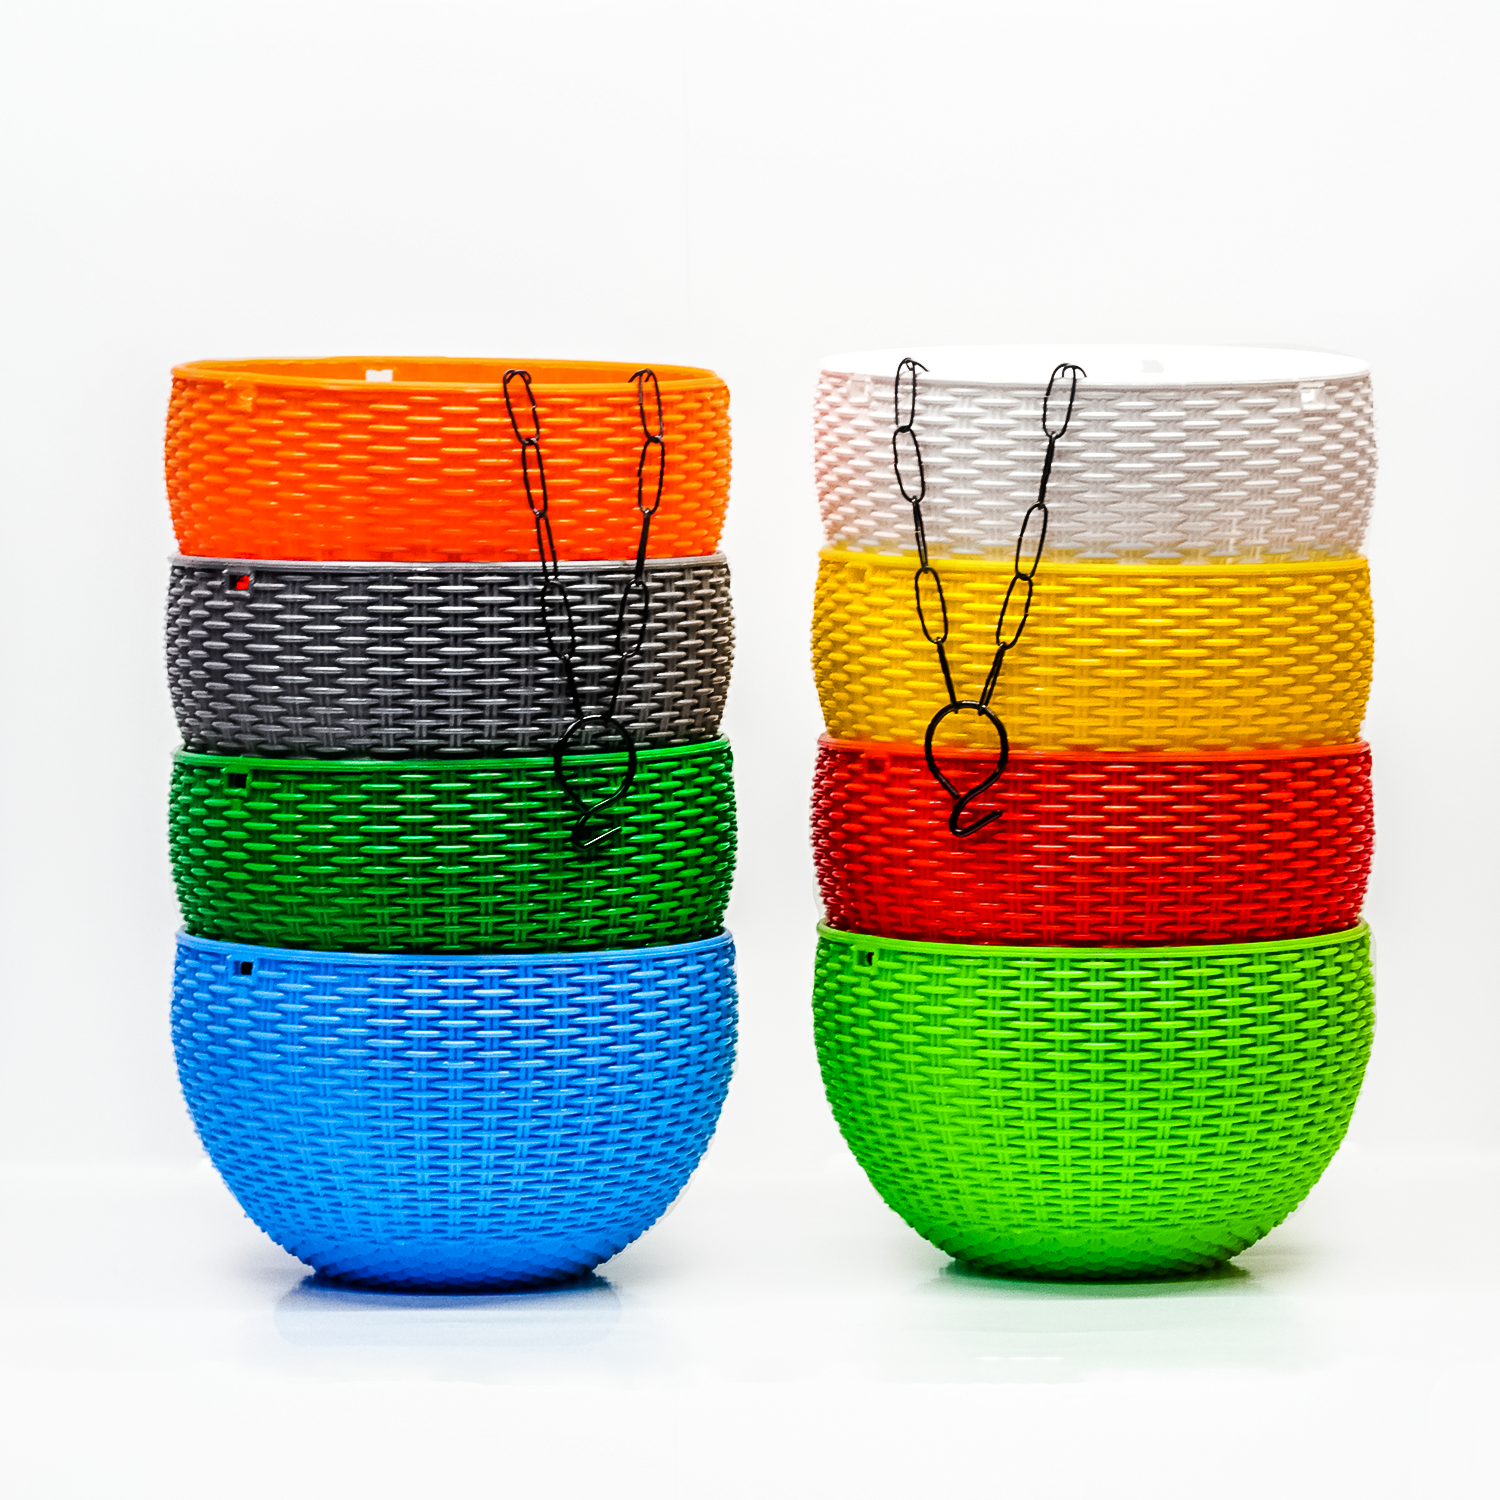 Platora - Hanging Pots(Set of 5, 8"Inch, Multi-Colour) Hanging Basket with Hook, Round Shape, Big Size for Indoor, Outdoor and Ceiling. Eye-Catching Colorful varieties for Home Decorations.